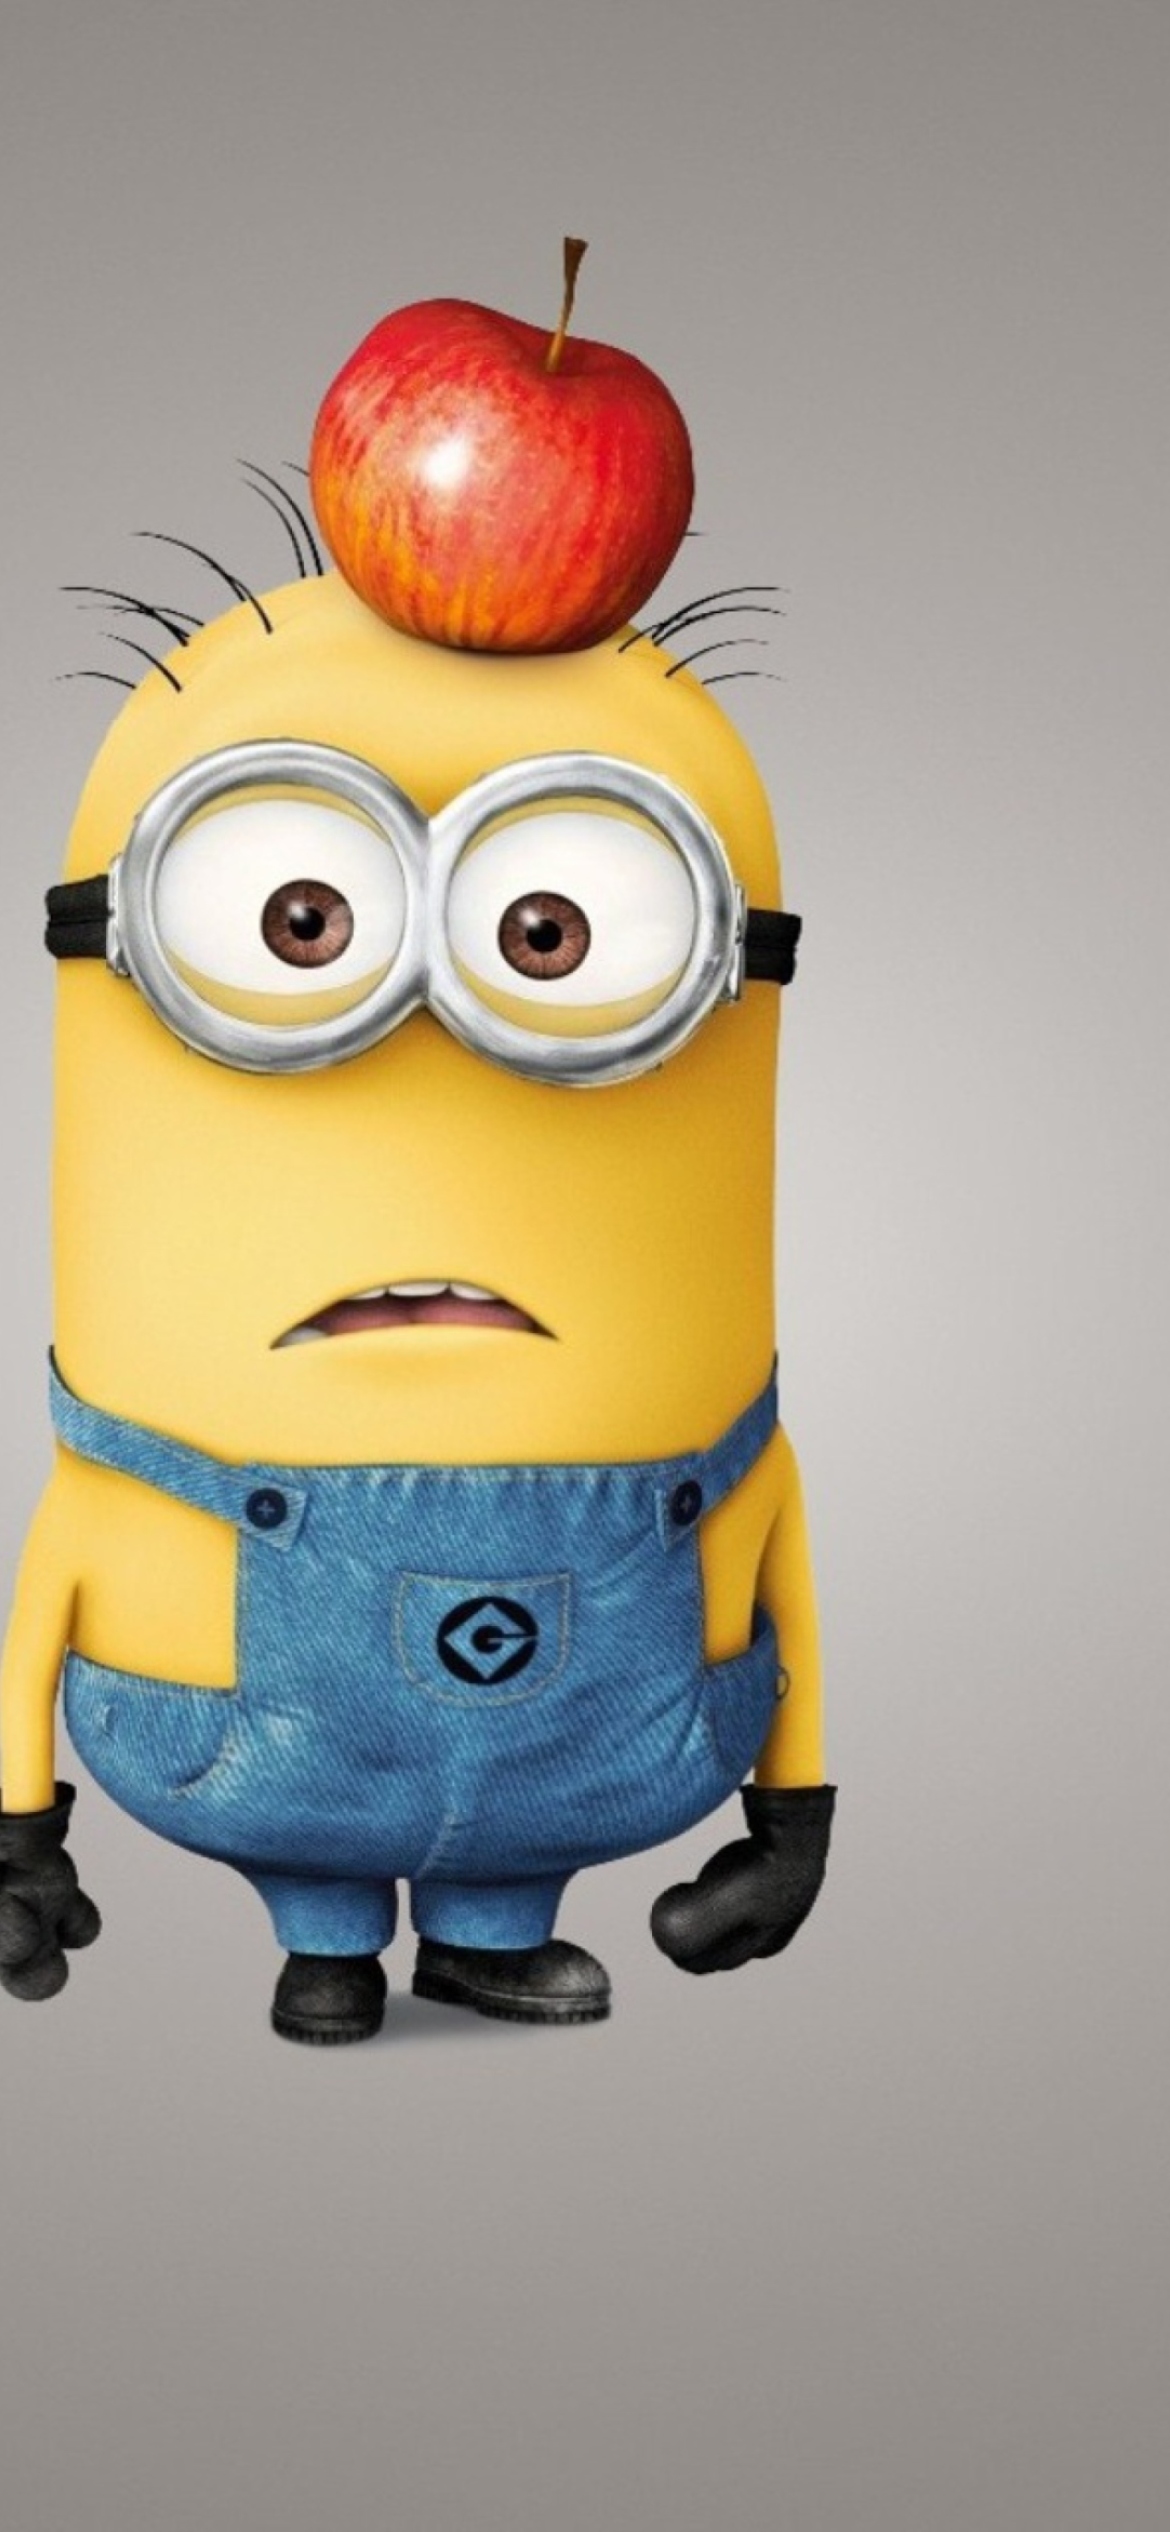 Minion With Apple wallpaper 1170x2532